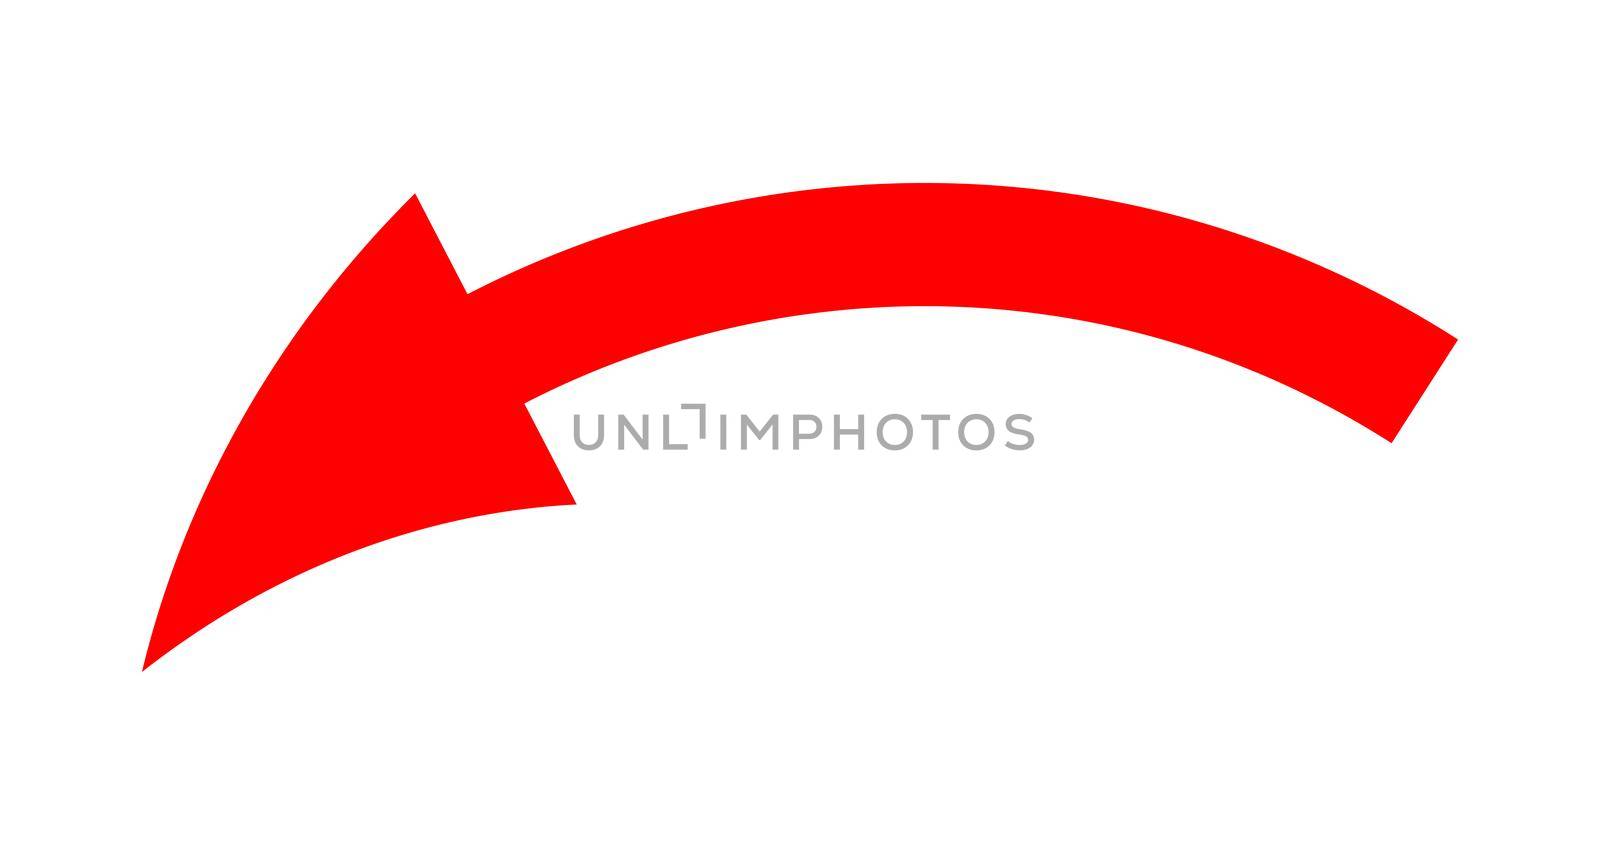 Red curved downward directional arrow pointing left on a white background